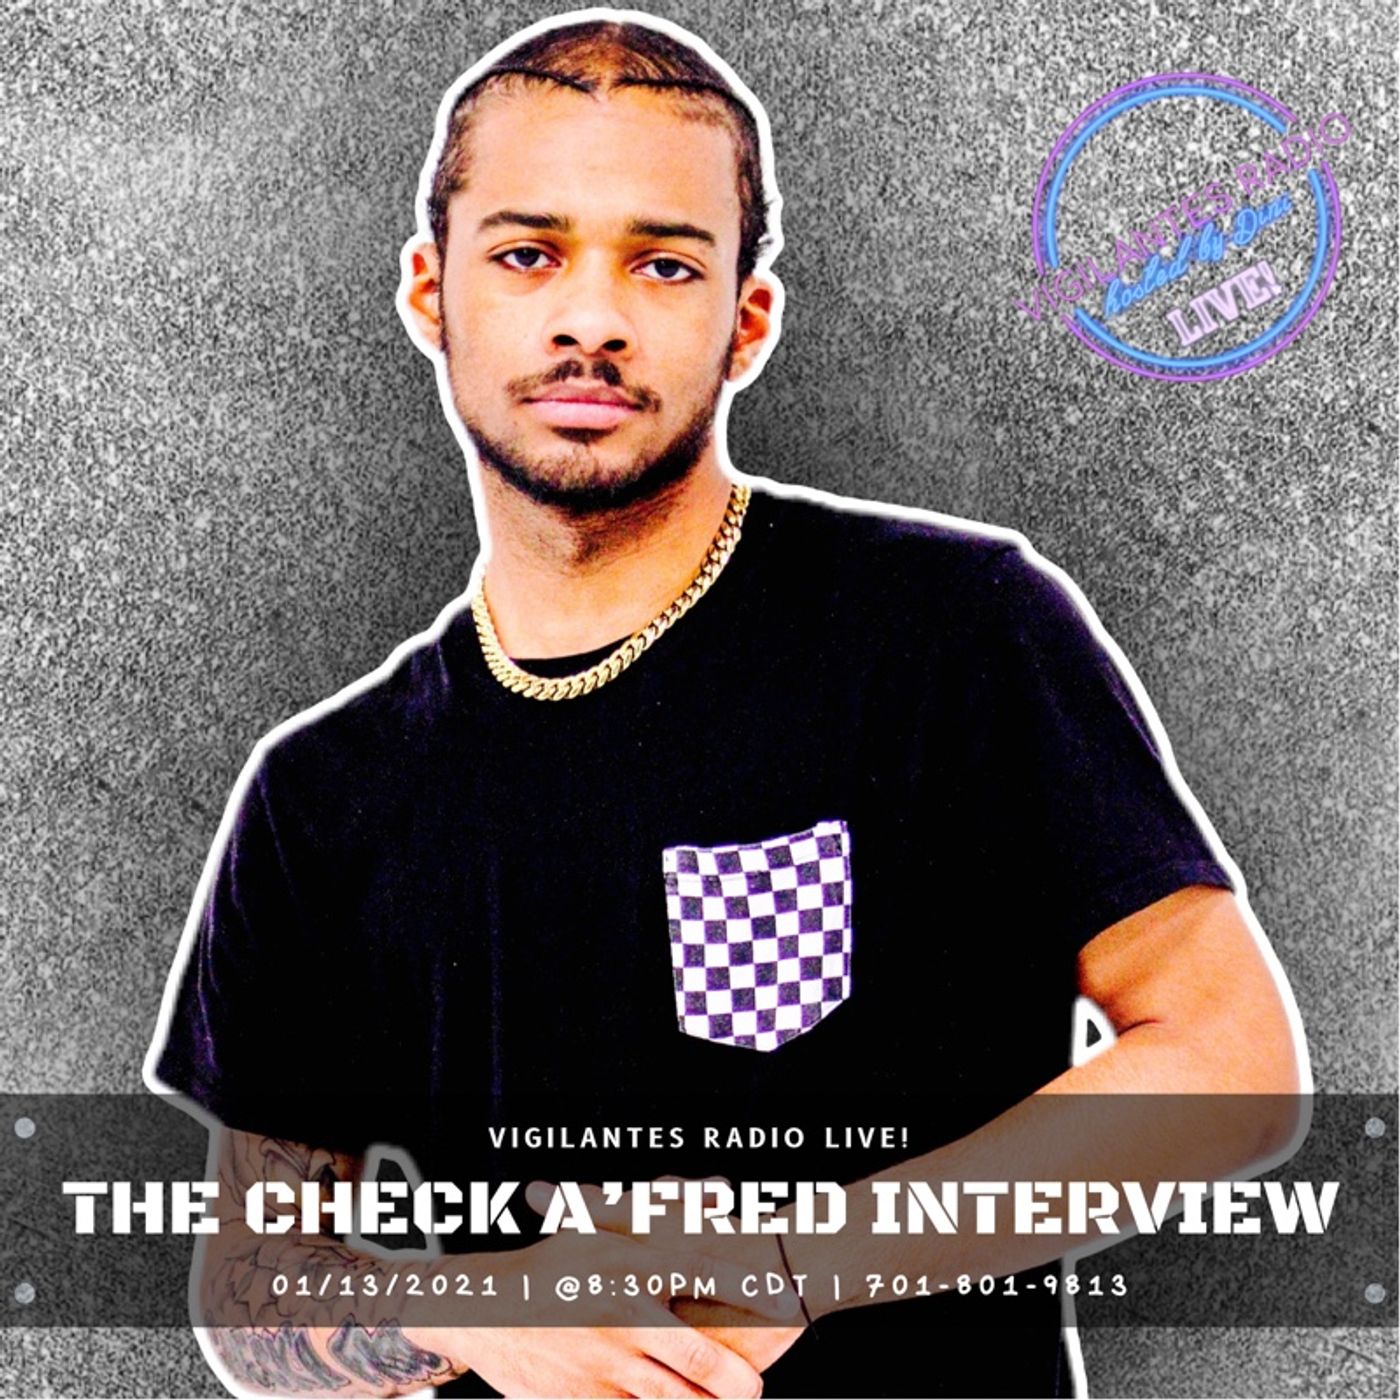 The Check a'Fred Interview. Image